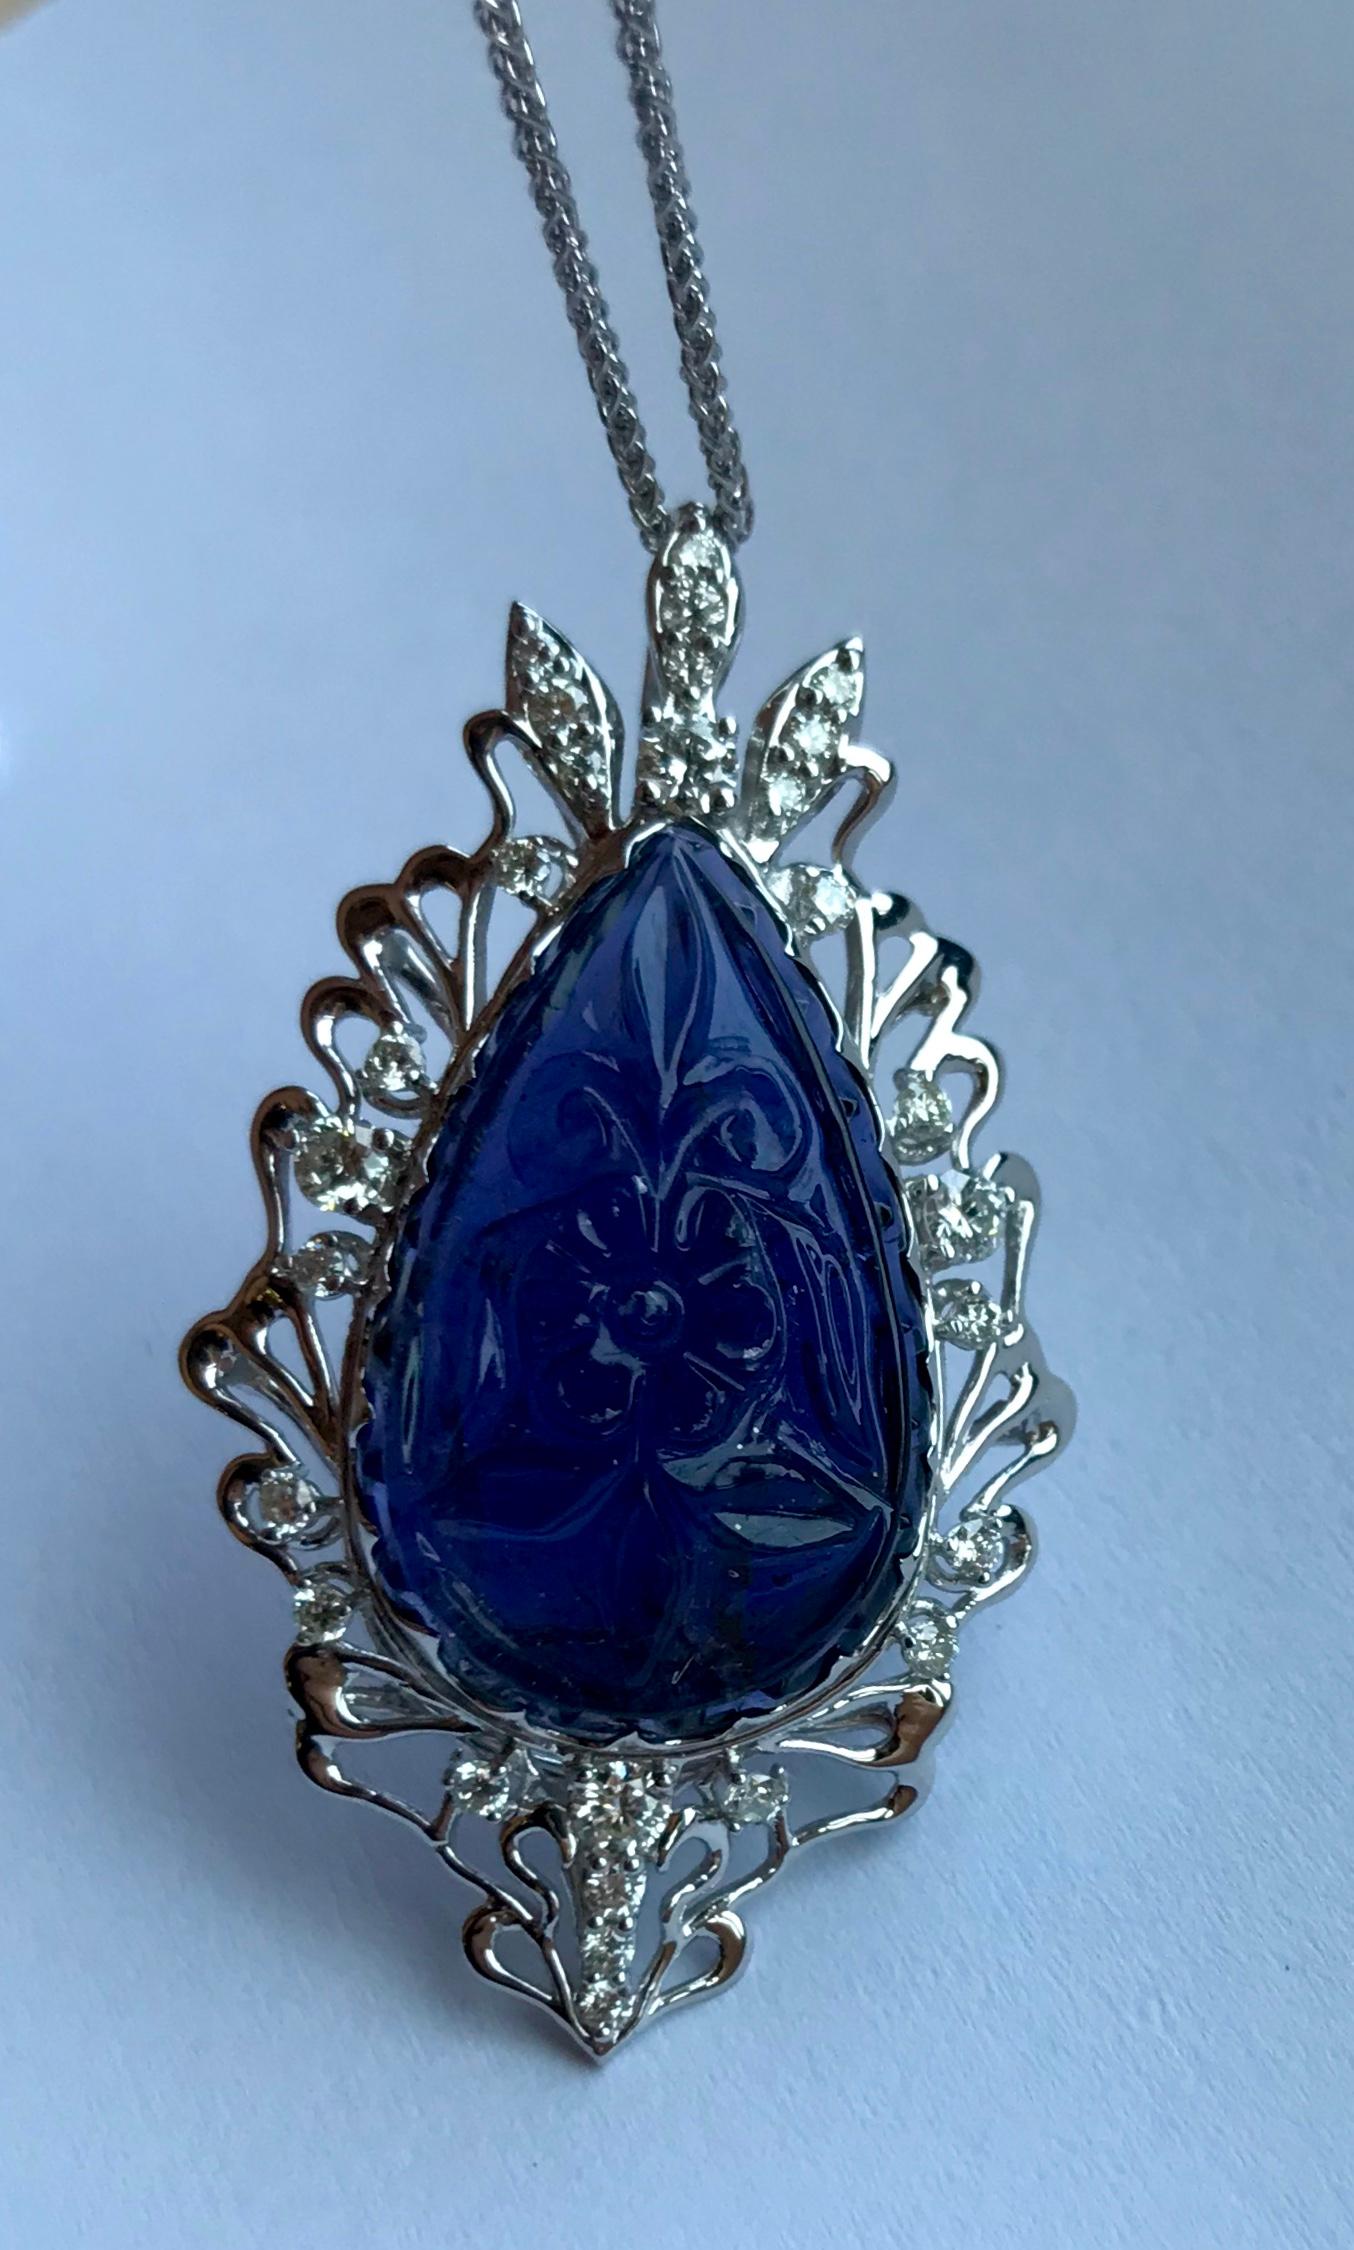 Material: 14k White Gold 
Center Stone Details: 11.70 Carat Pear Shaped Iolite - 25 x 15 mm
Diamonds:  28 Round Diamonds at 0.60 Carats.  SI Quality /  H-I Color
Chain:  18 inch

Pair this with our 11.84 Carat Carved Iolite Earrings and Pear Shaped